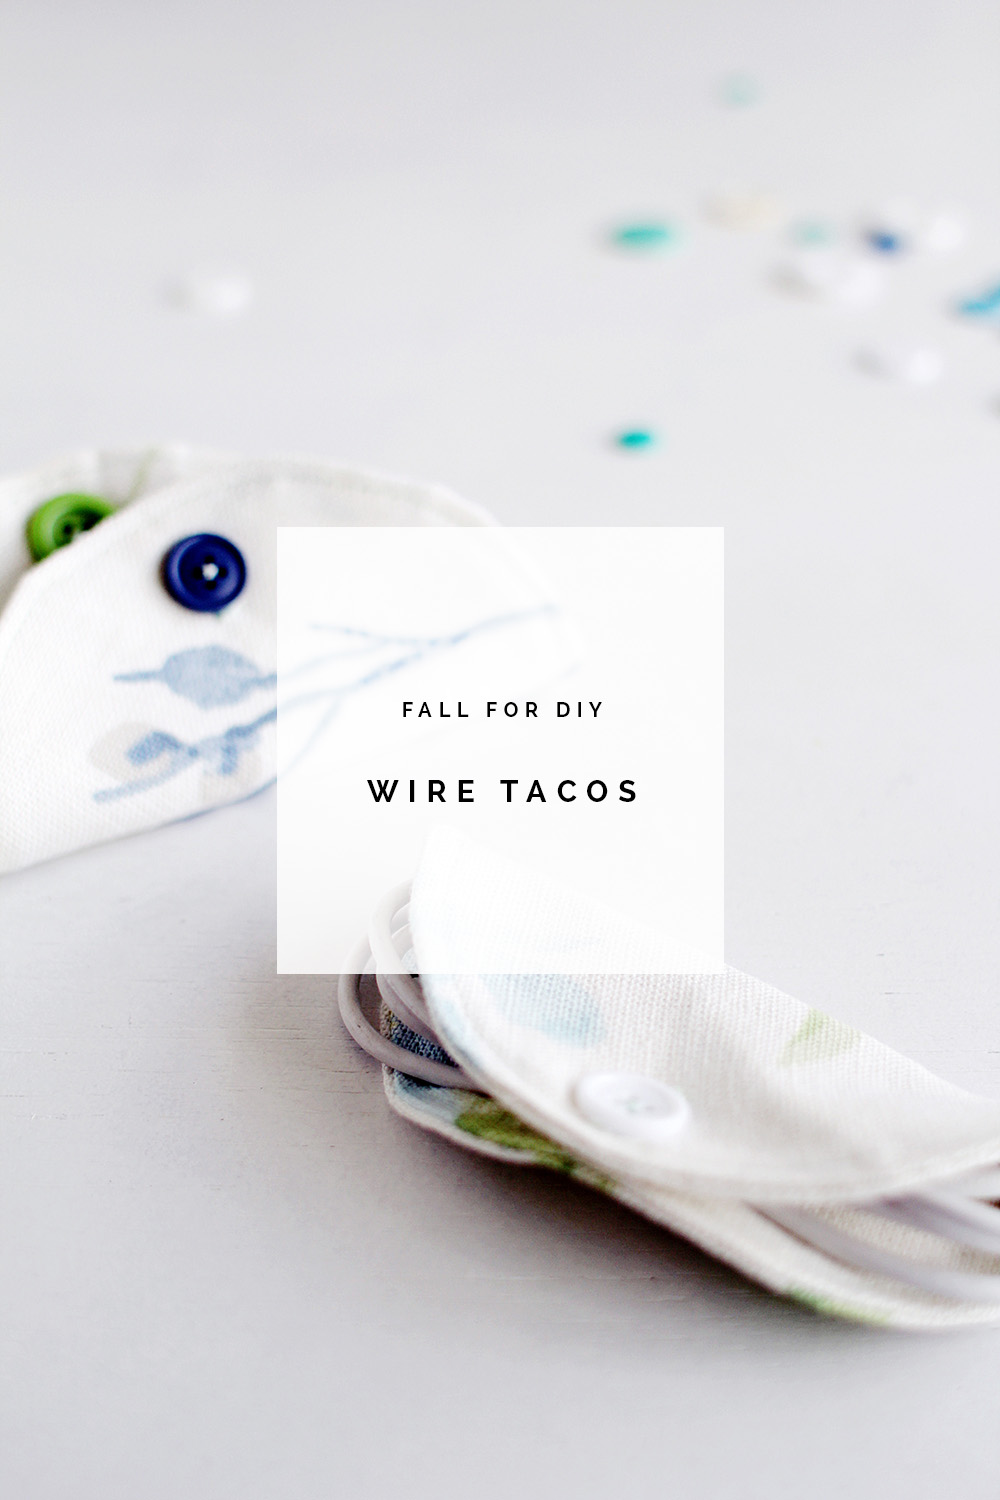 Fall For DIY Wire Tacos with Laura Ashley